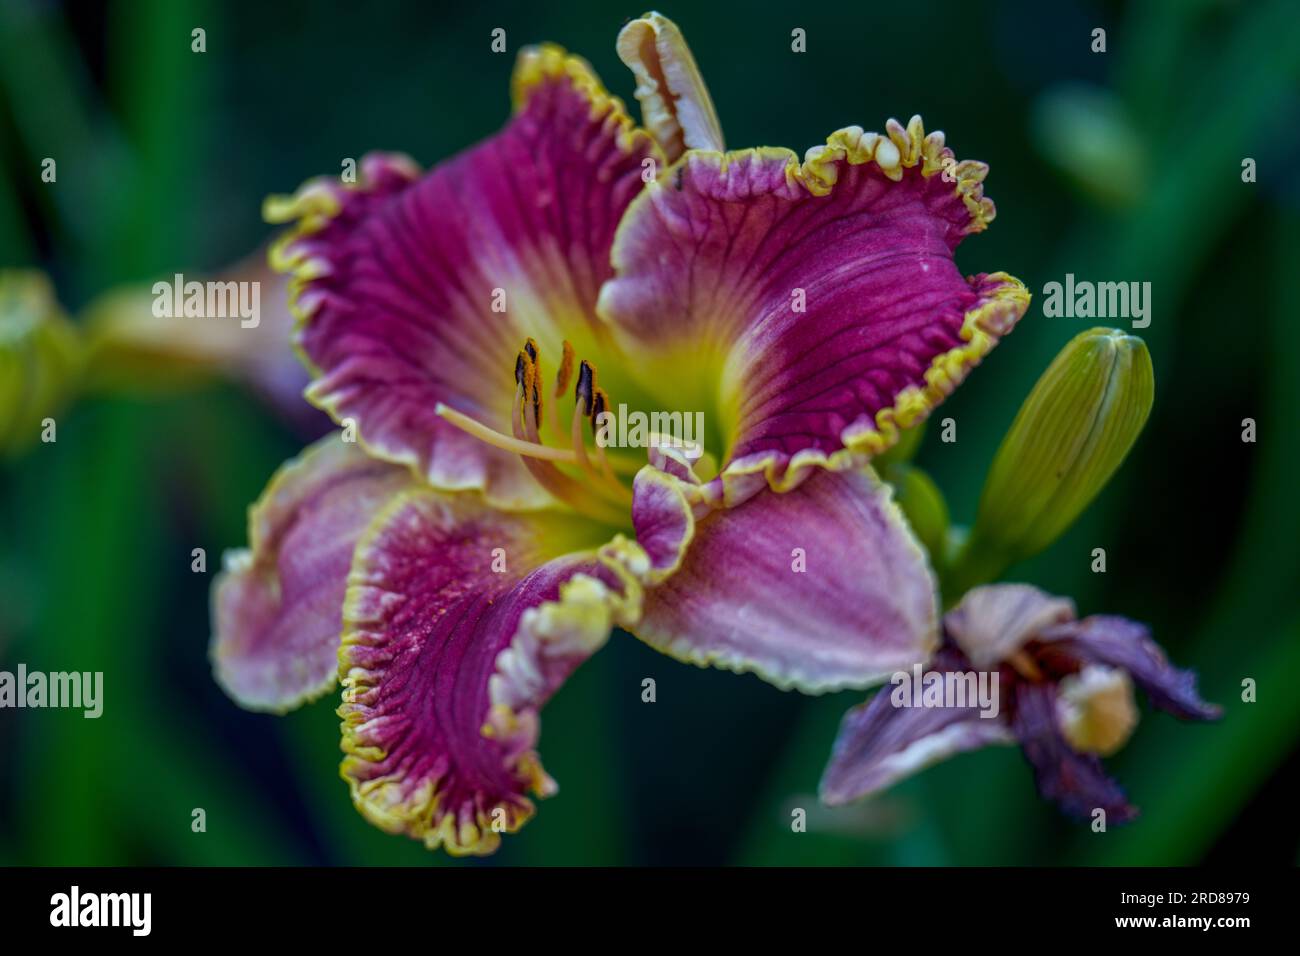 Lush,colorful vivid purple pink day lily flower close up Stock Photo